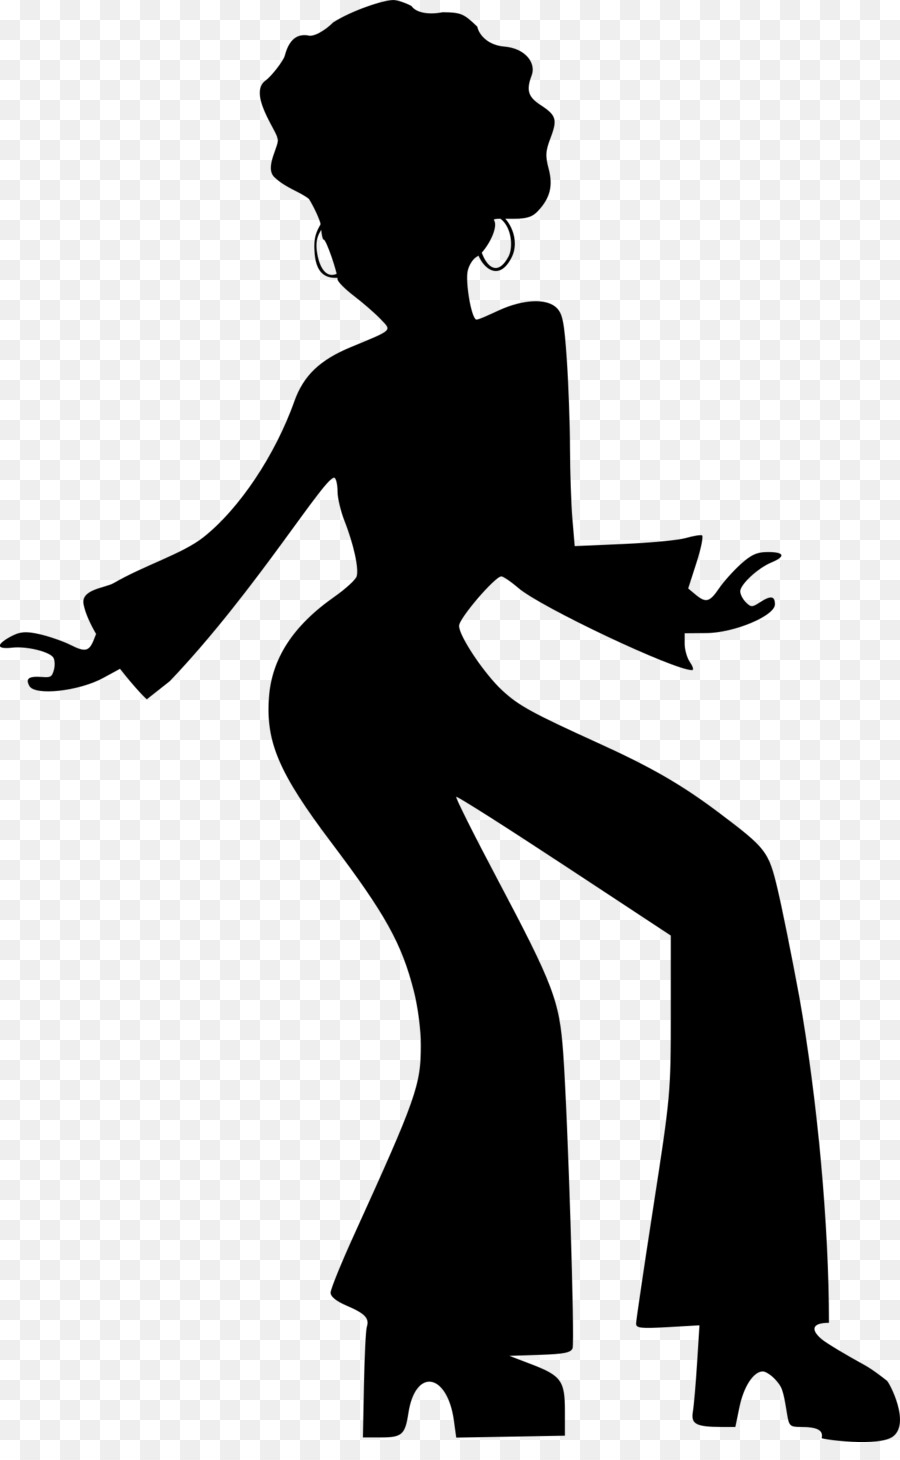 1970s Disco Dance Drawing Clip art - Silhouette png download - 1498*2400 - Free Transparent Disco png Download.